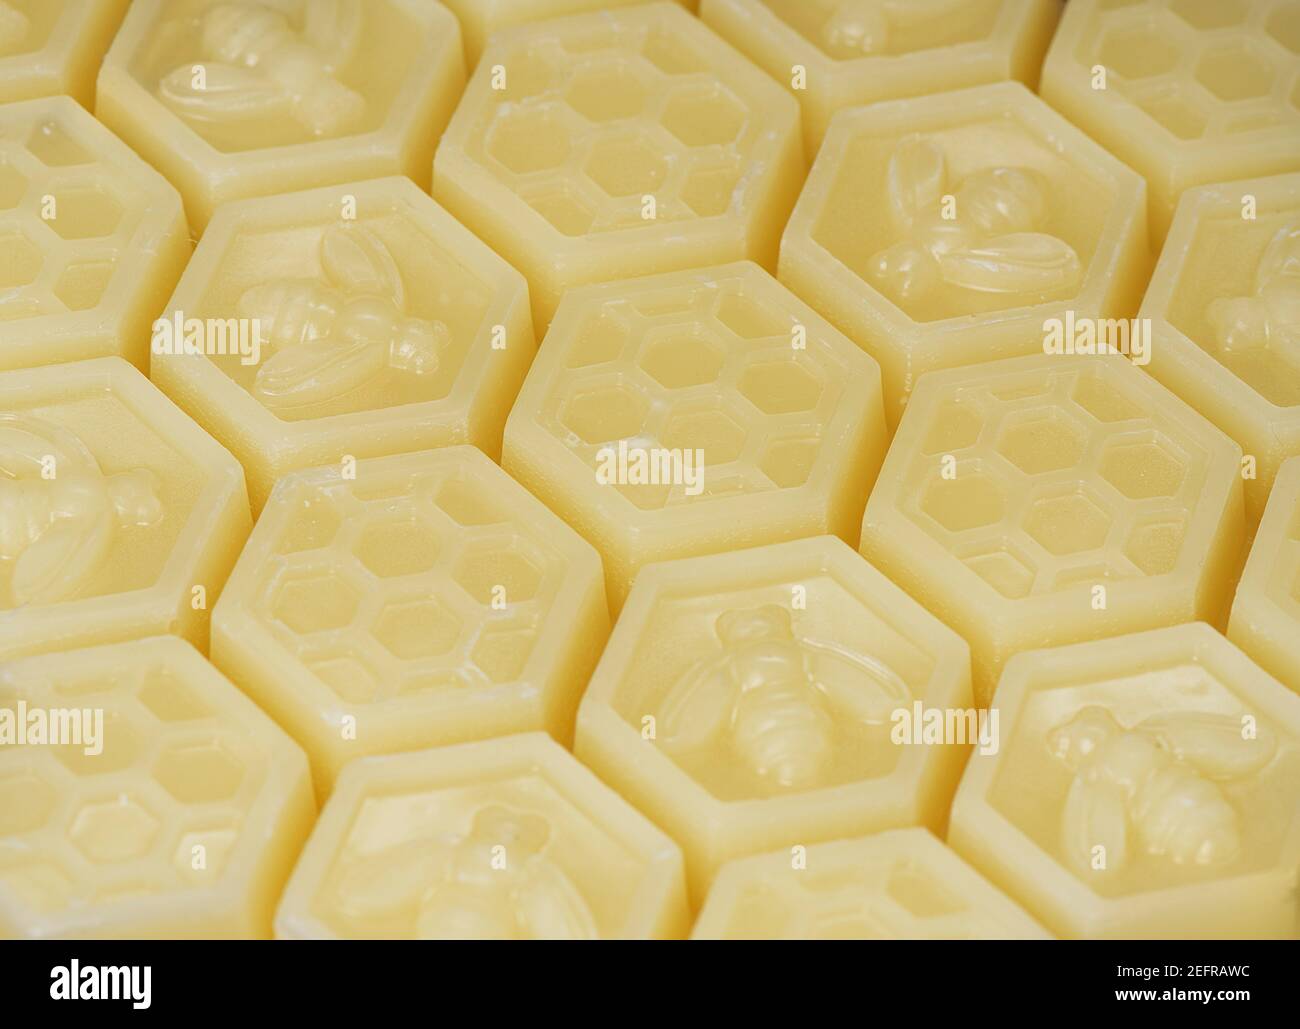 Natural Beeswax, Cera Alba, Bees Wax product in hexagon shaped clusters. Closeup background texture. Stock Photo